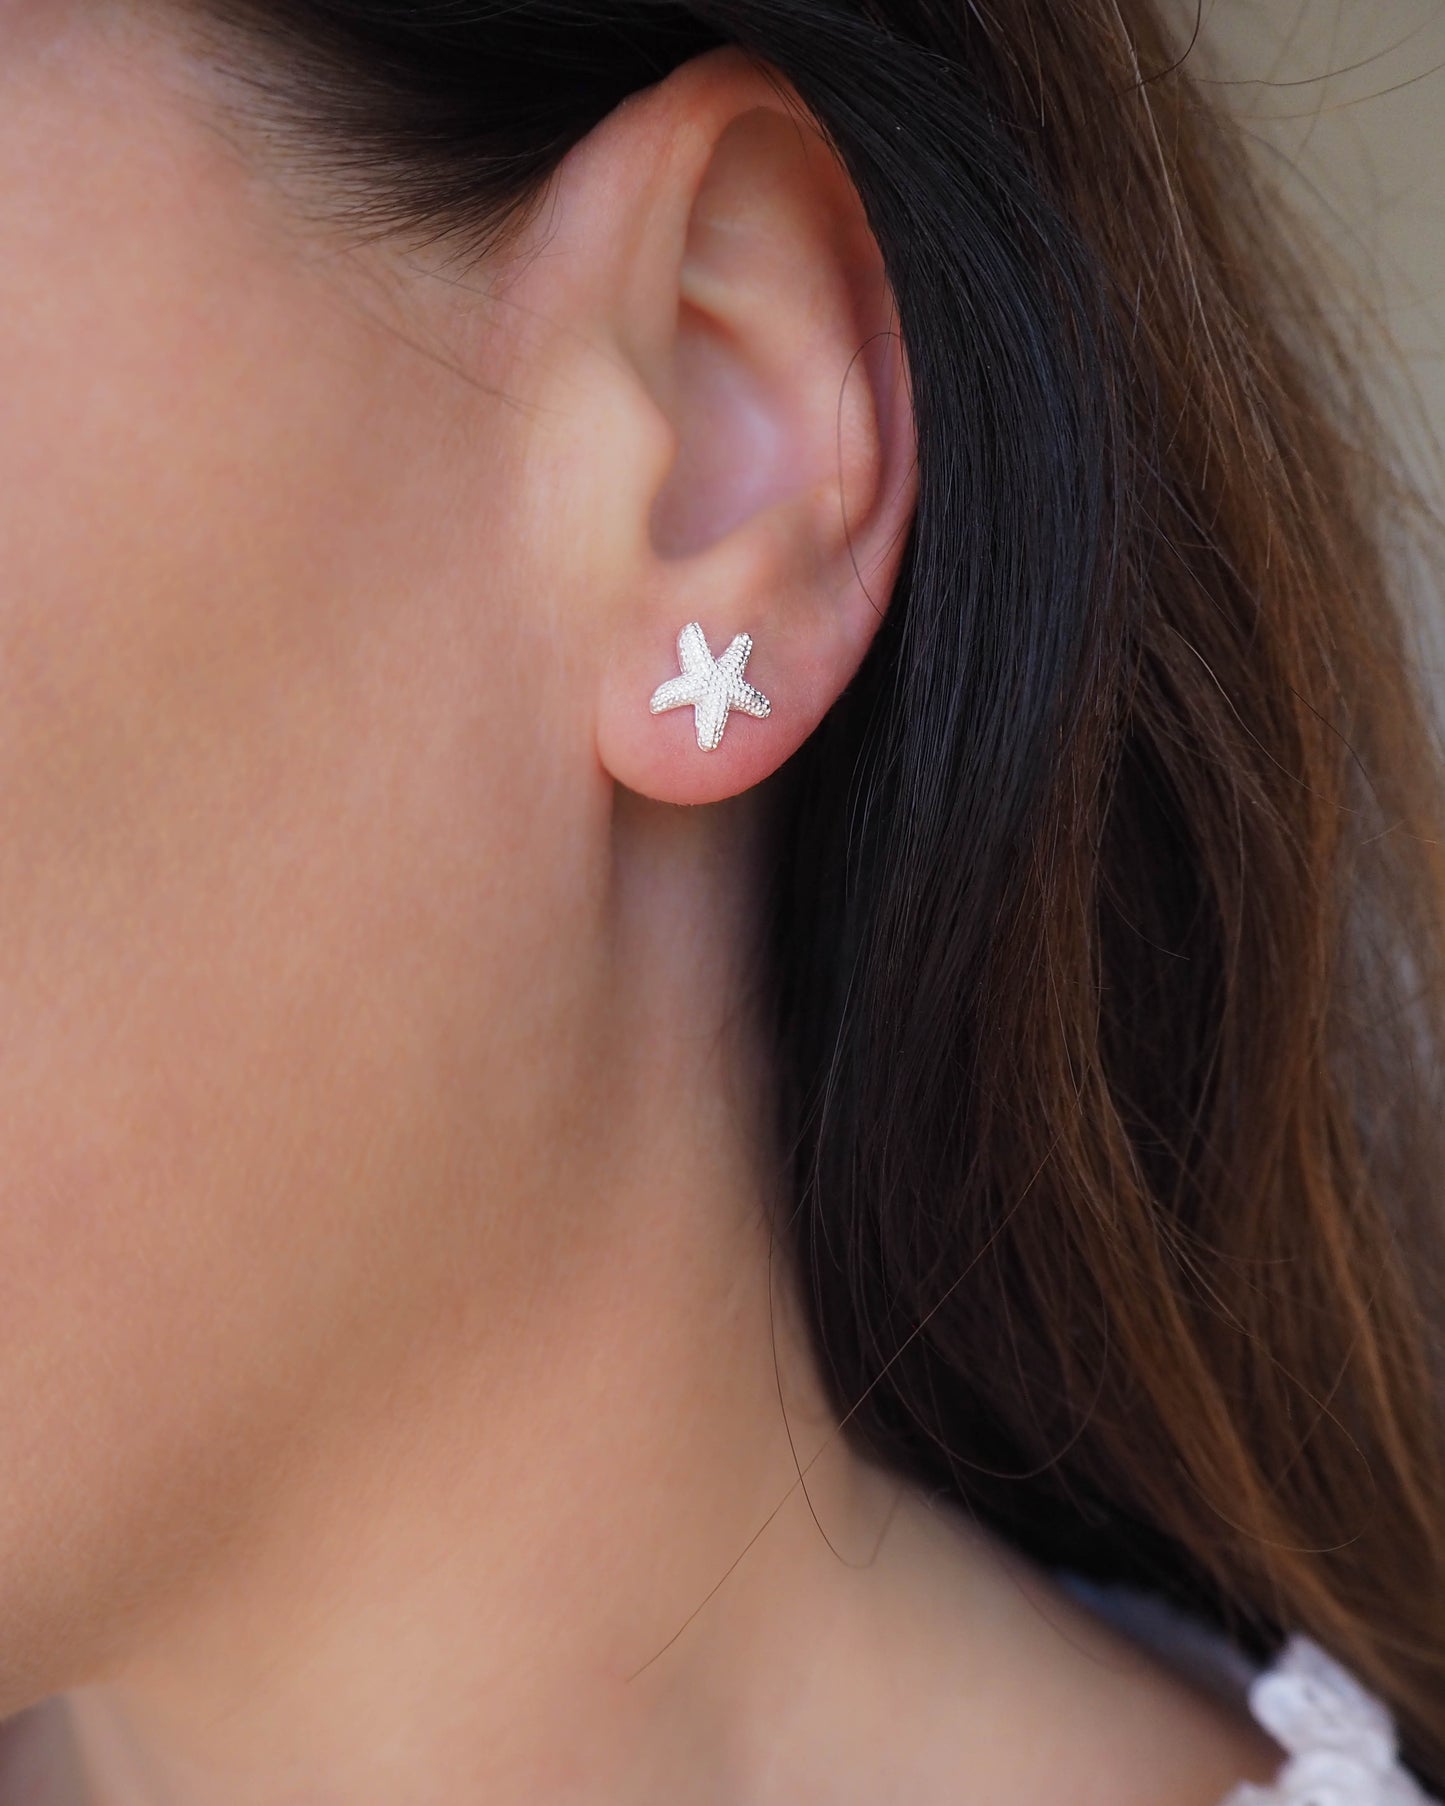 Model wearing Sterling Silver Earring Studs with Sea Star - Coastal Chic Jewelry, SeabyLou